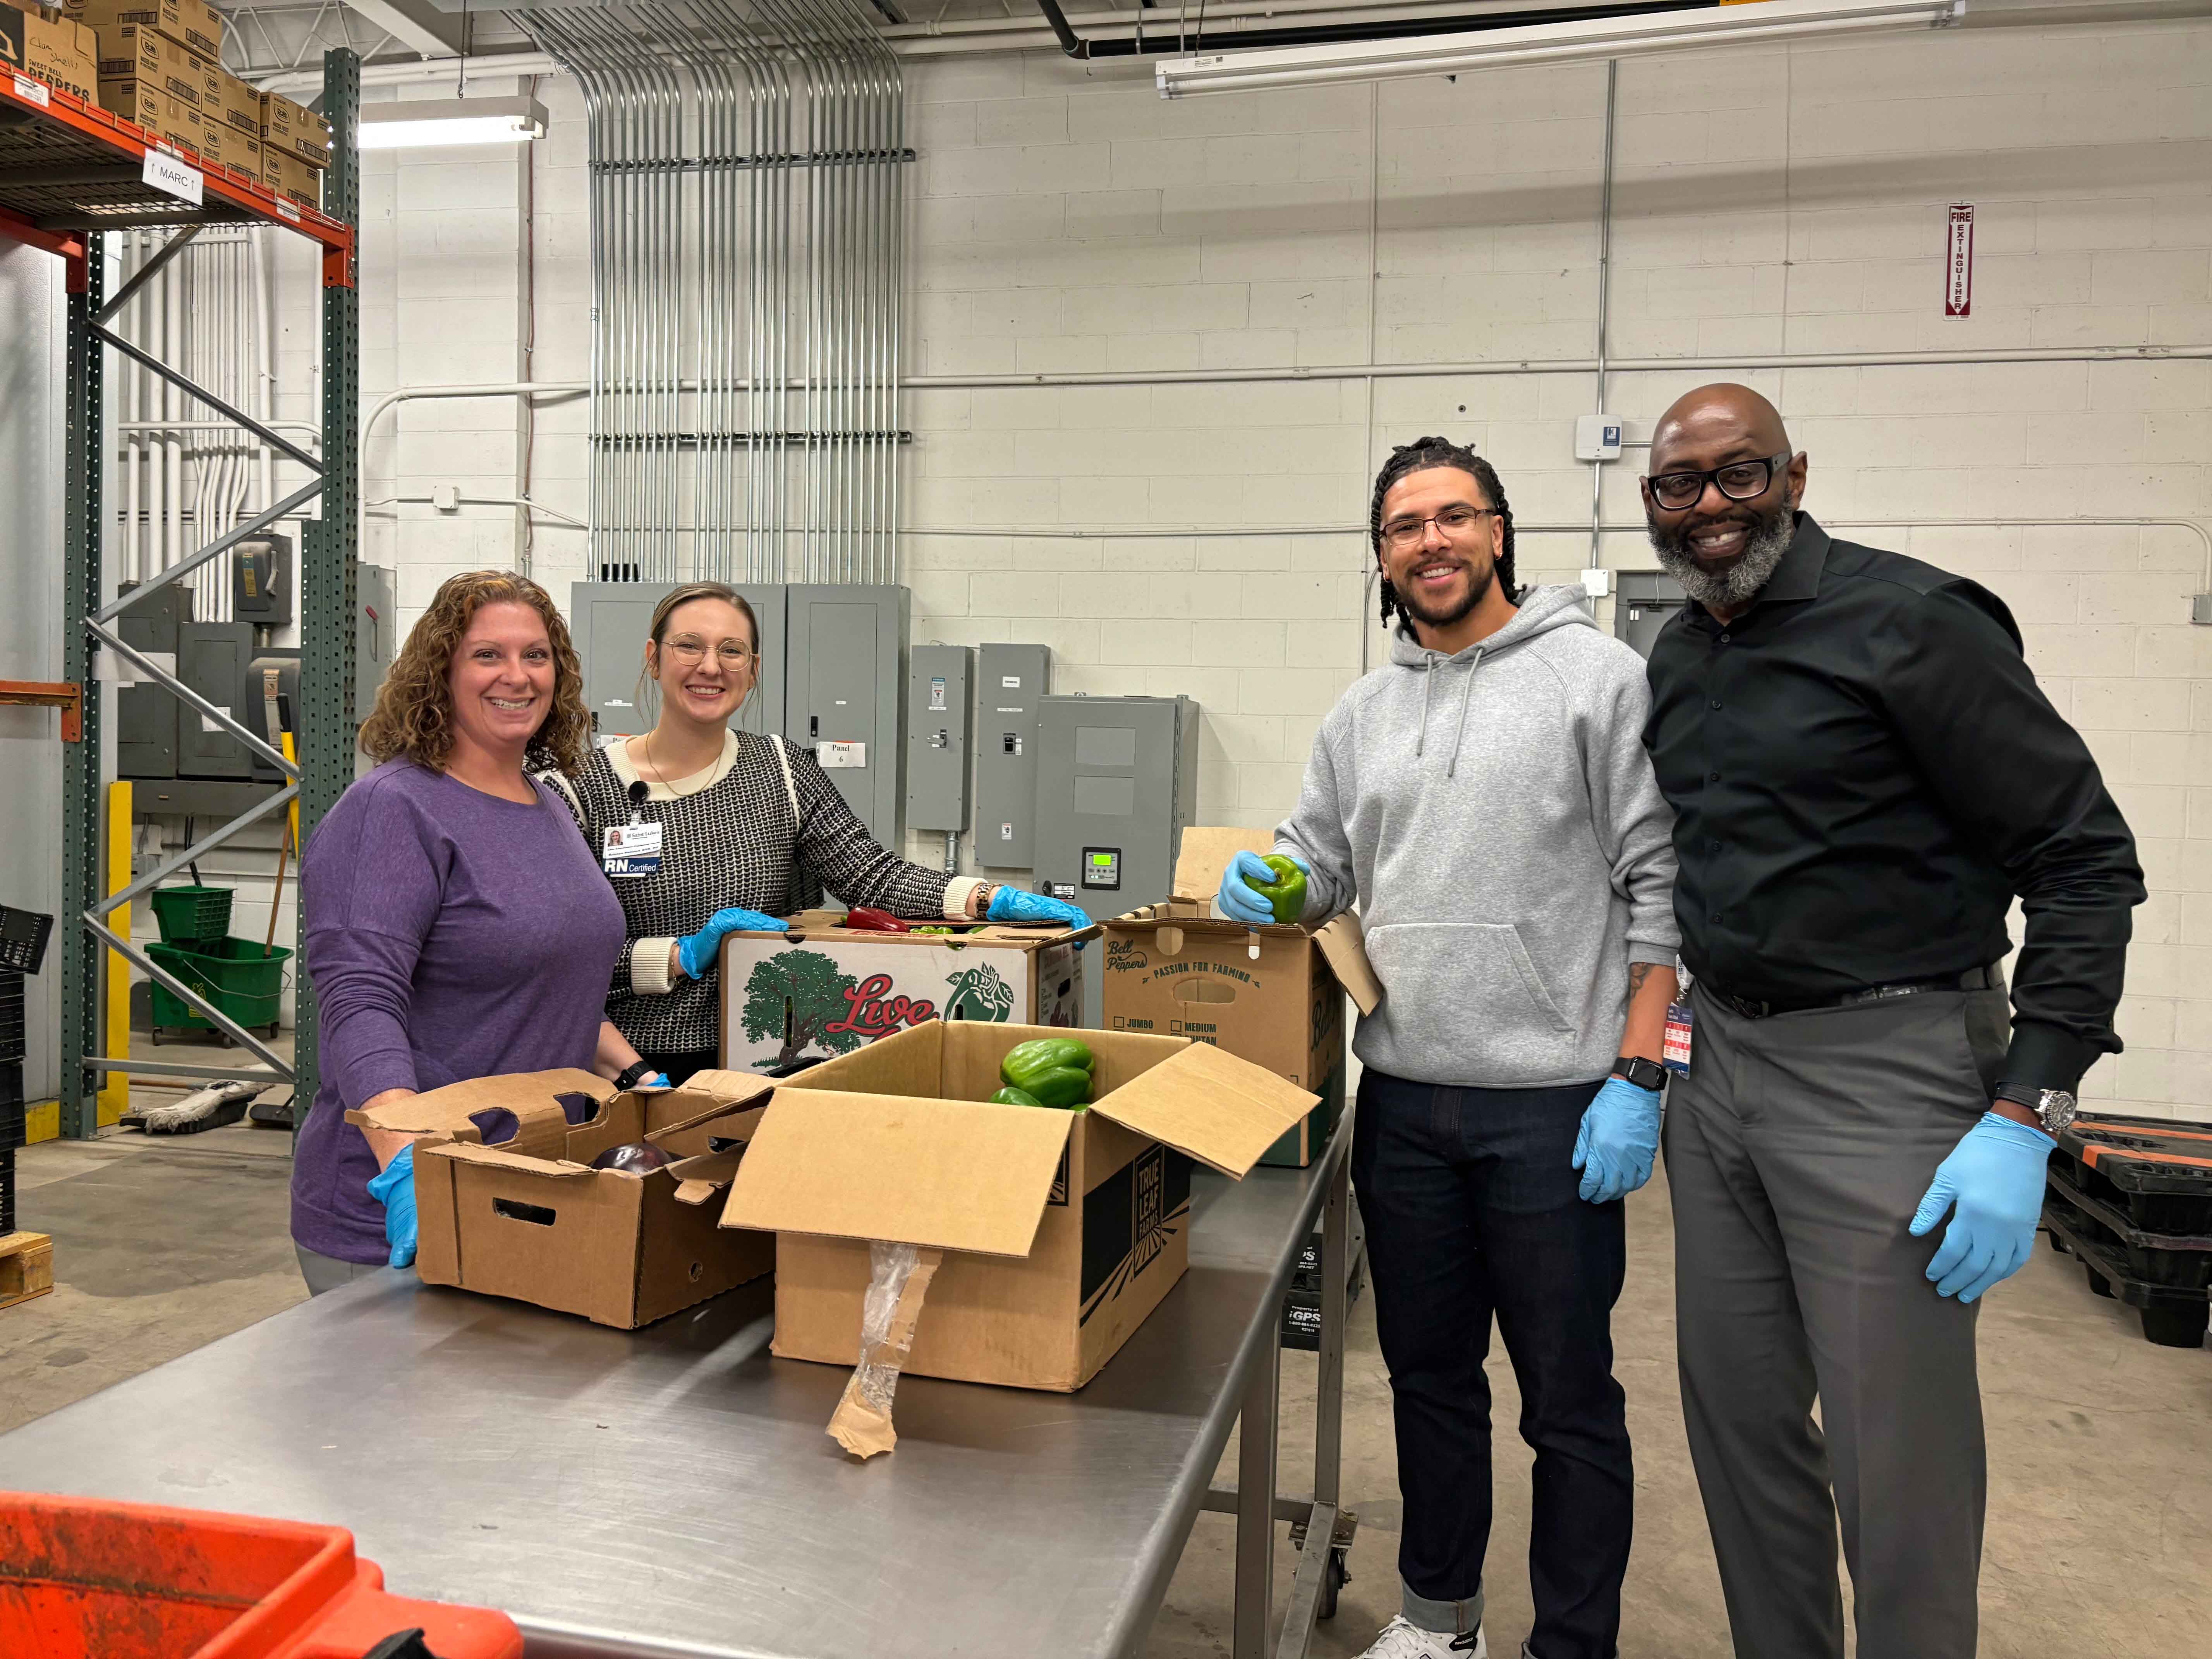 Saint Luke’s Population Health Team members volunteer at Kanbe’s Markets; sorting produce sent to area corner stores so that people in Kansas City’s underserved communities can access healthy, fresh foods.